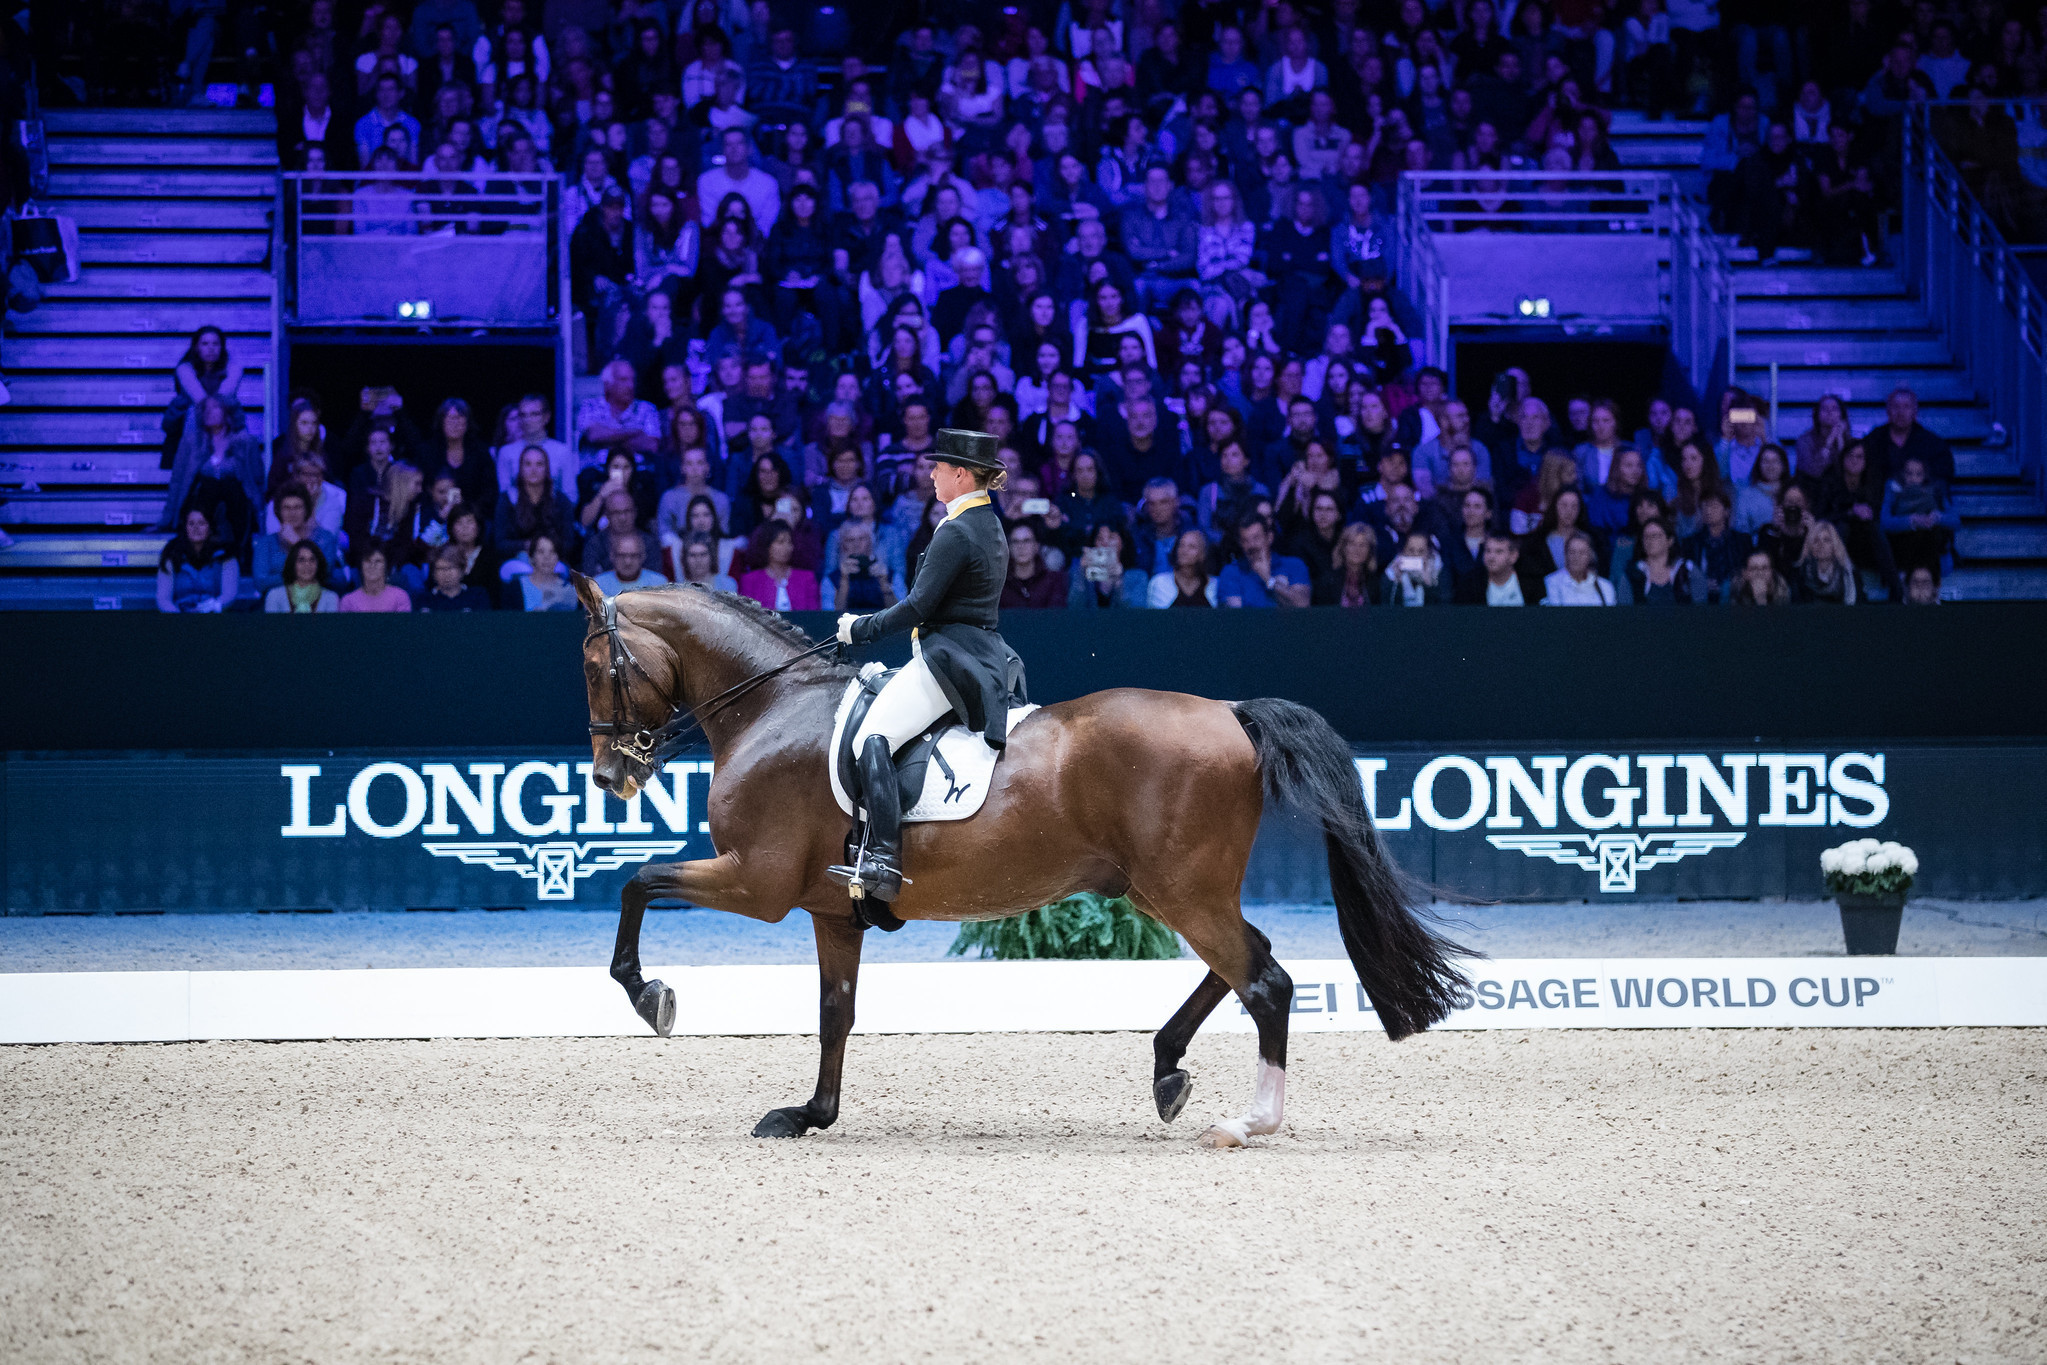 Werth wins Dressage World Cup title in Lyon for third time in a row